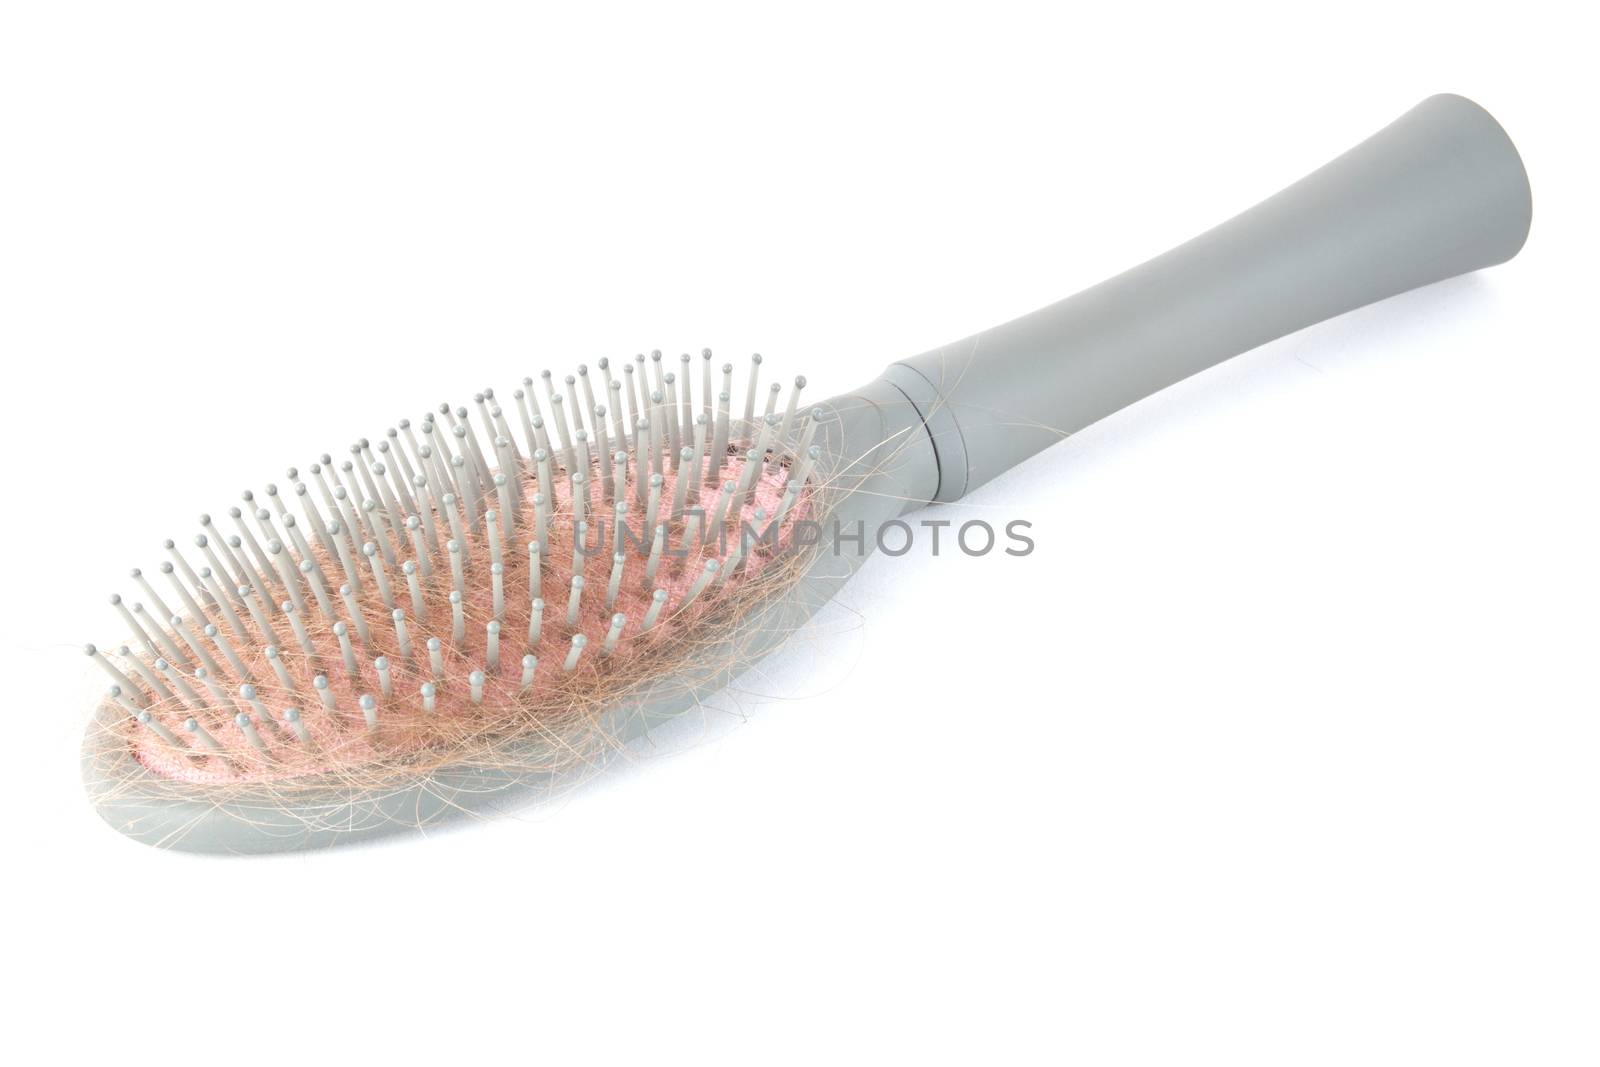 Closeup of a hairbrush with hair fall on white background.